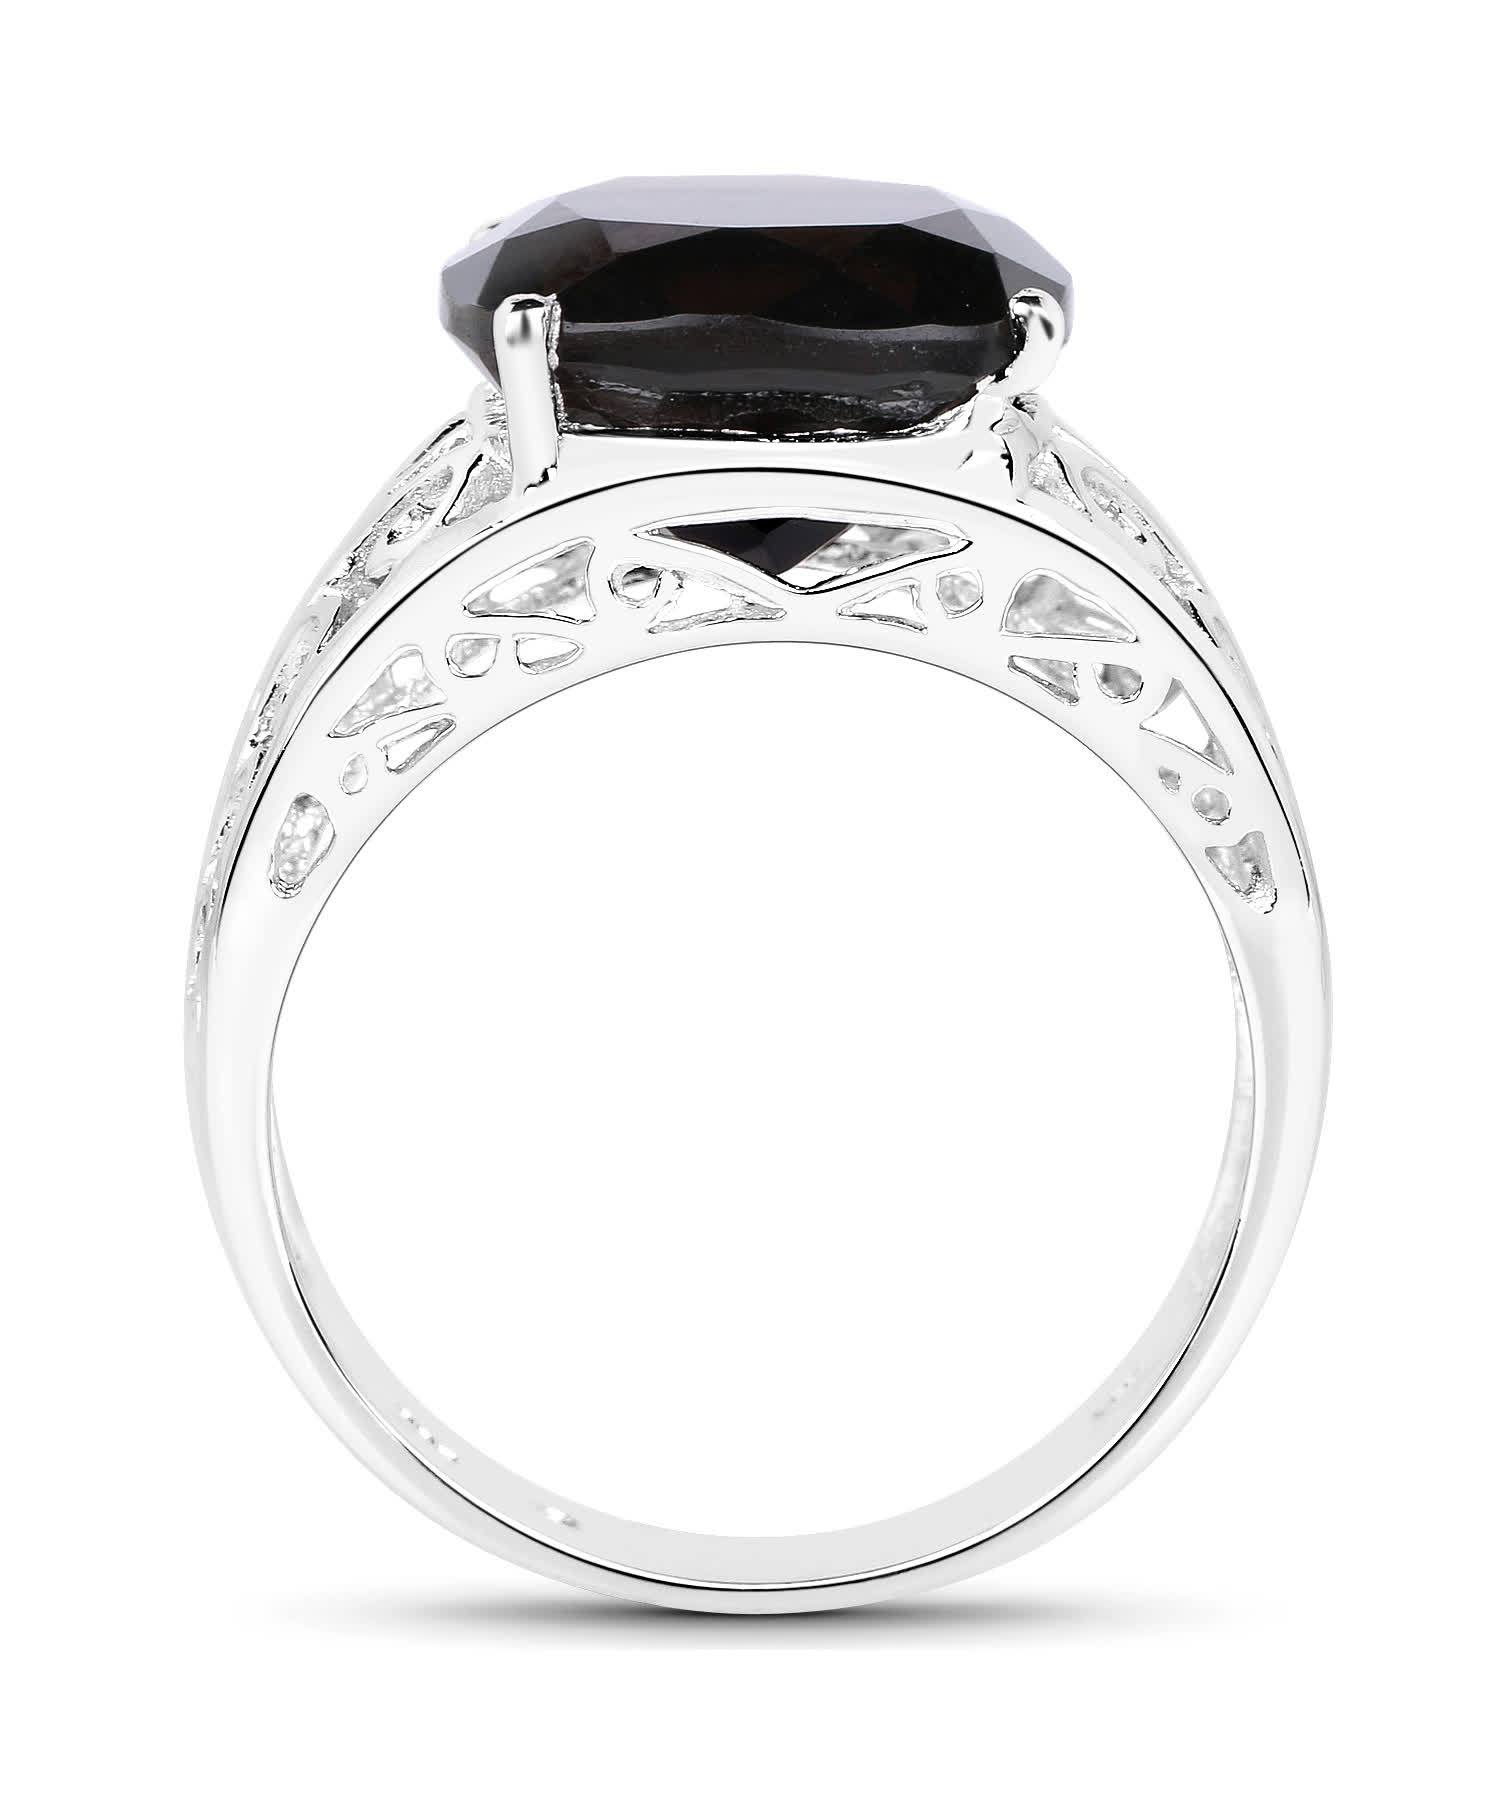 7.09ctw Natural Smoky Quartz Rhodium Plated 925 Sterling Silver Cocktail Ring View 2